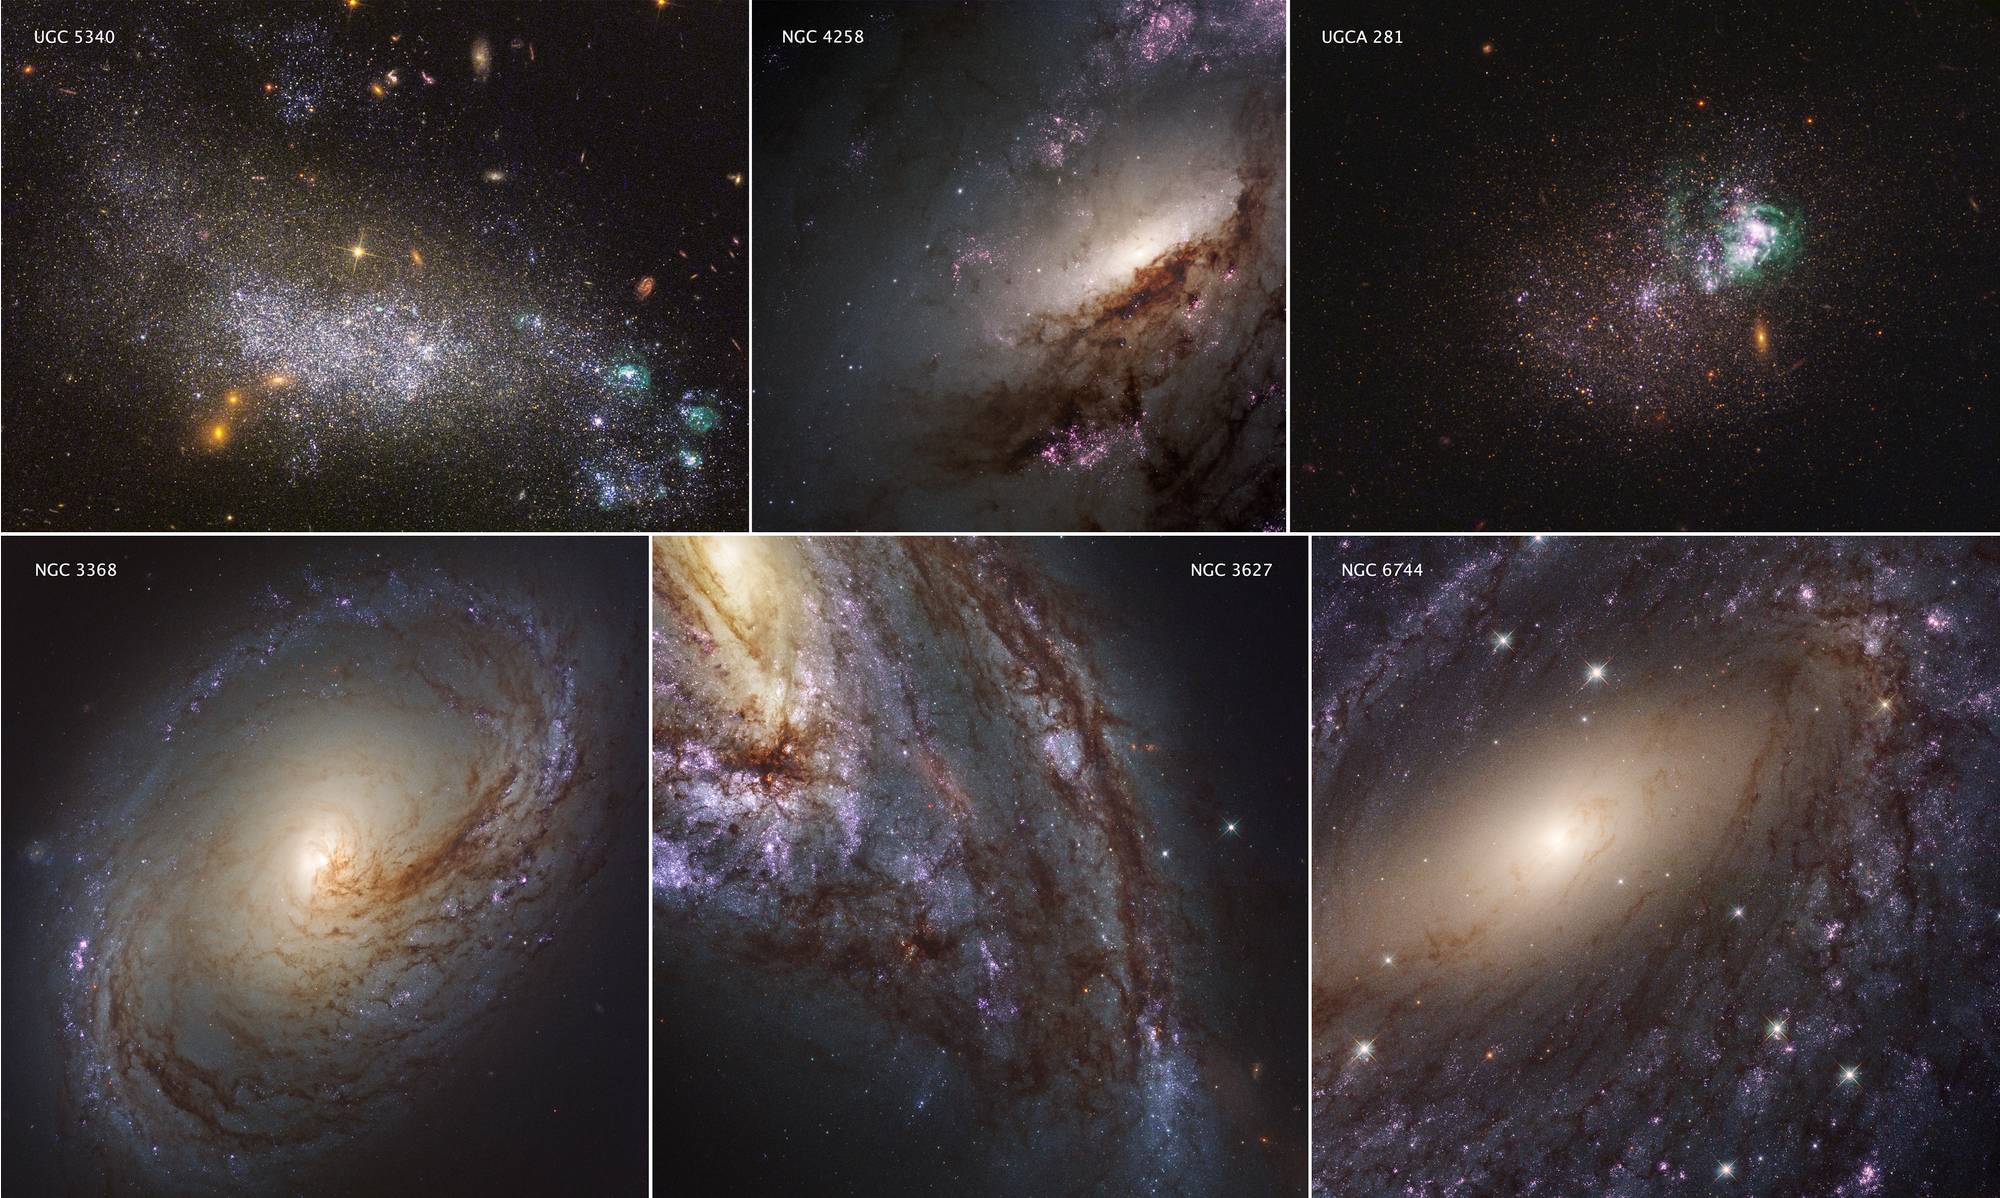 Astronomers reveal the largest ever survey of 50 galaxies in ultraviolet light